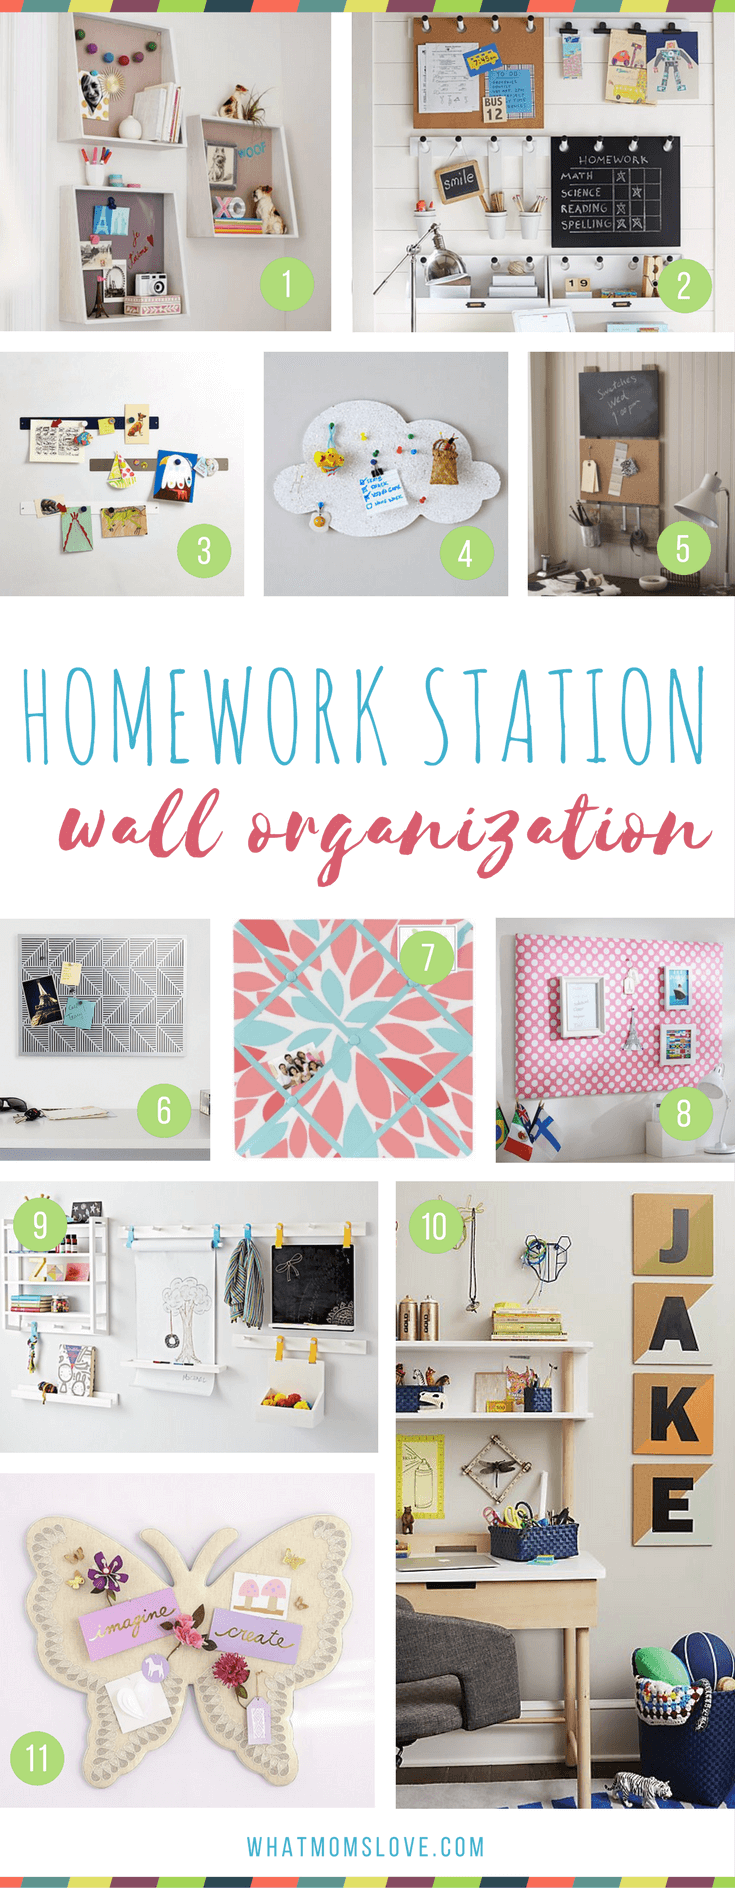 How to make a homework station for kids - wall organization for a study space